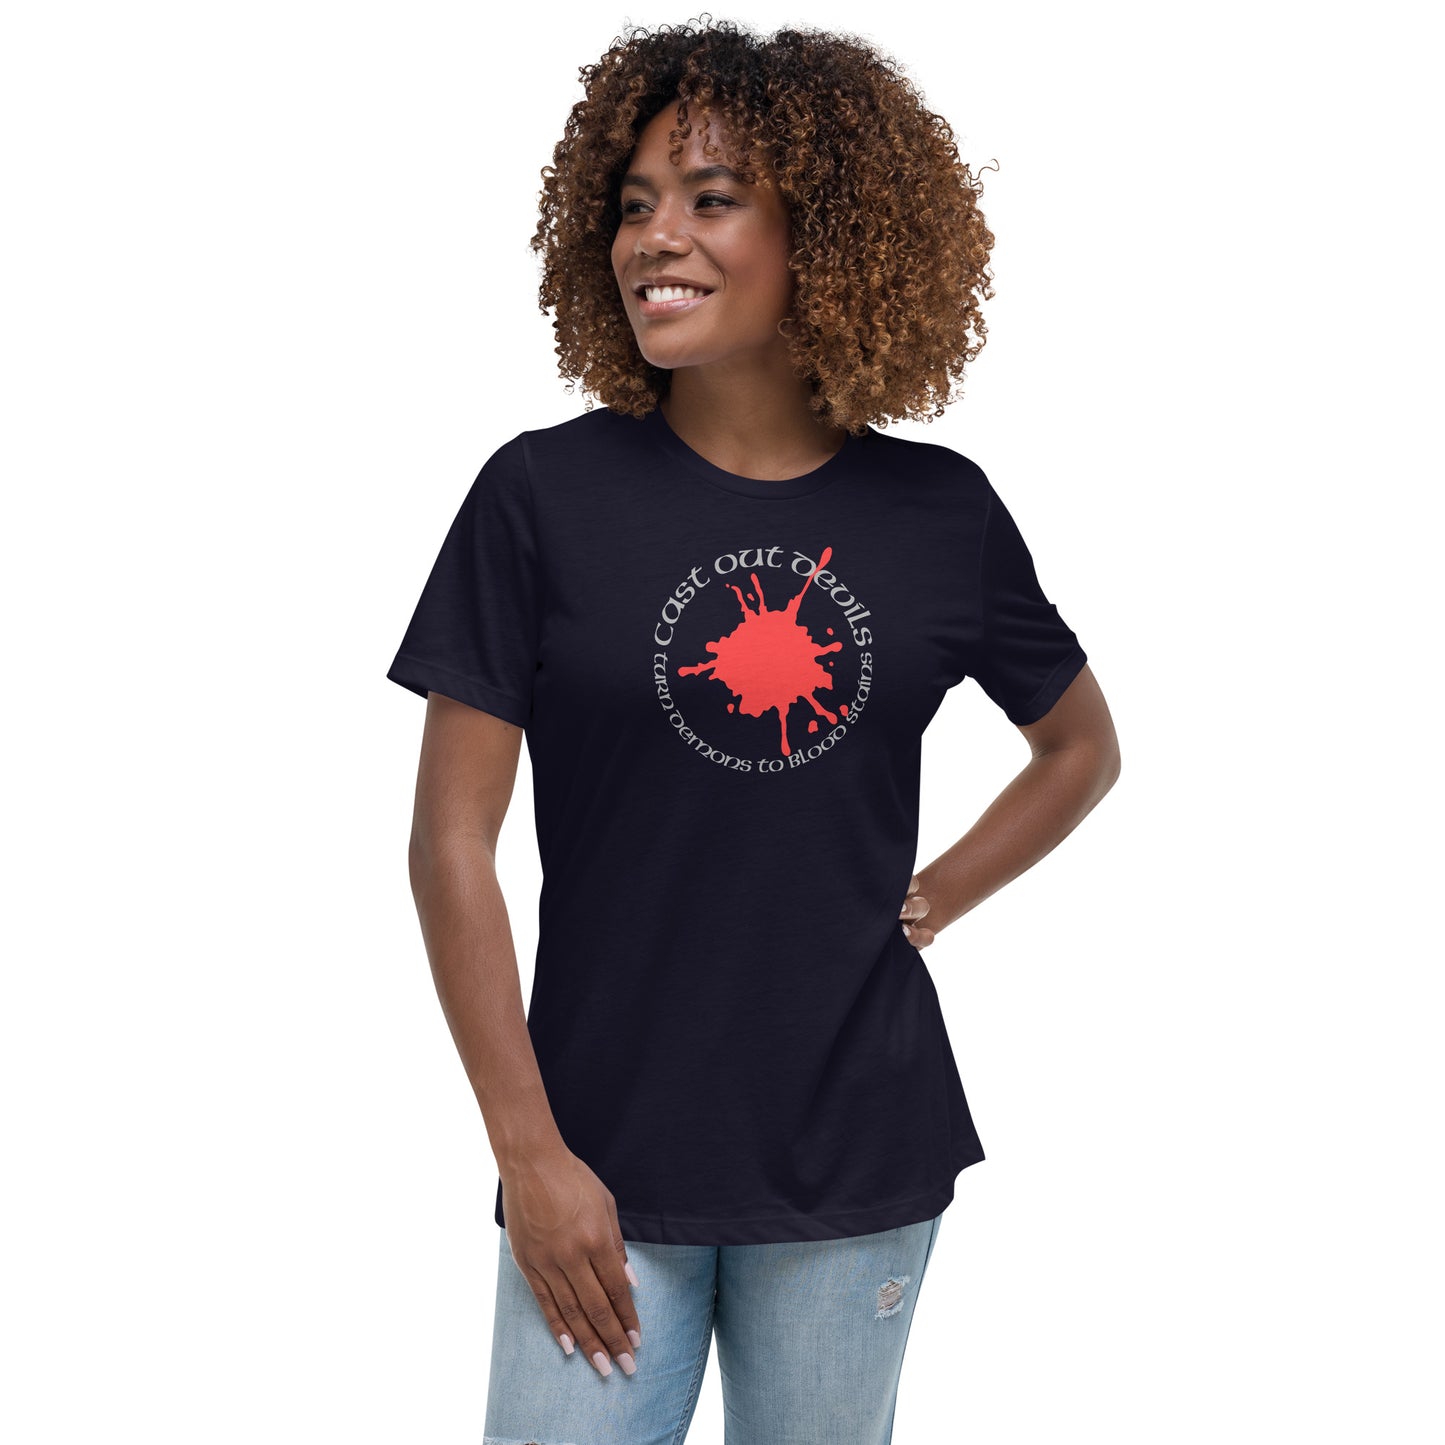 Cast Out Devils Turn Demons To Blood Stains Women's Relaxed T-Shirt